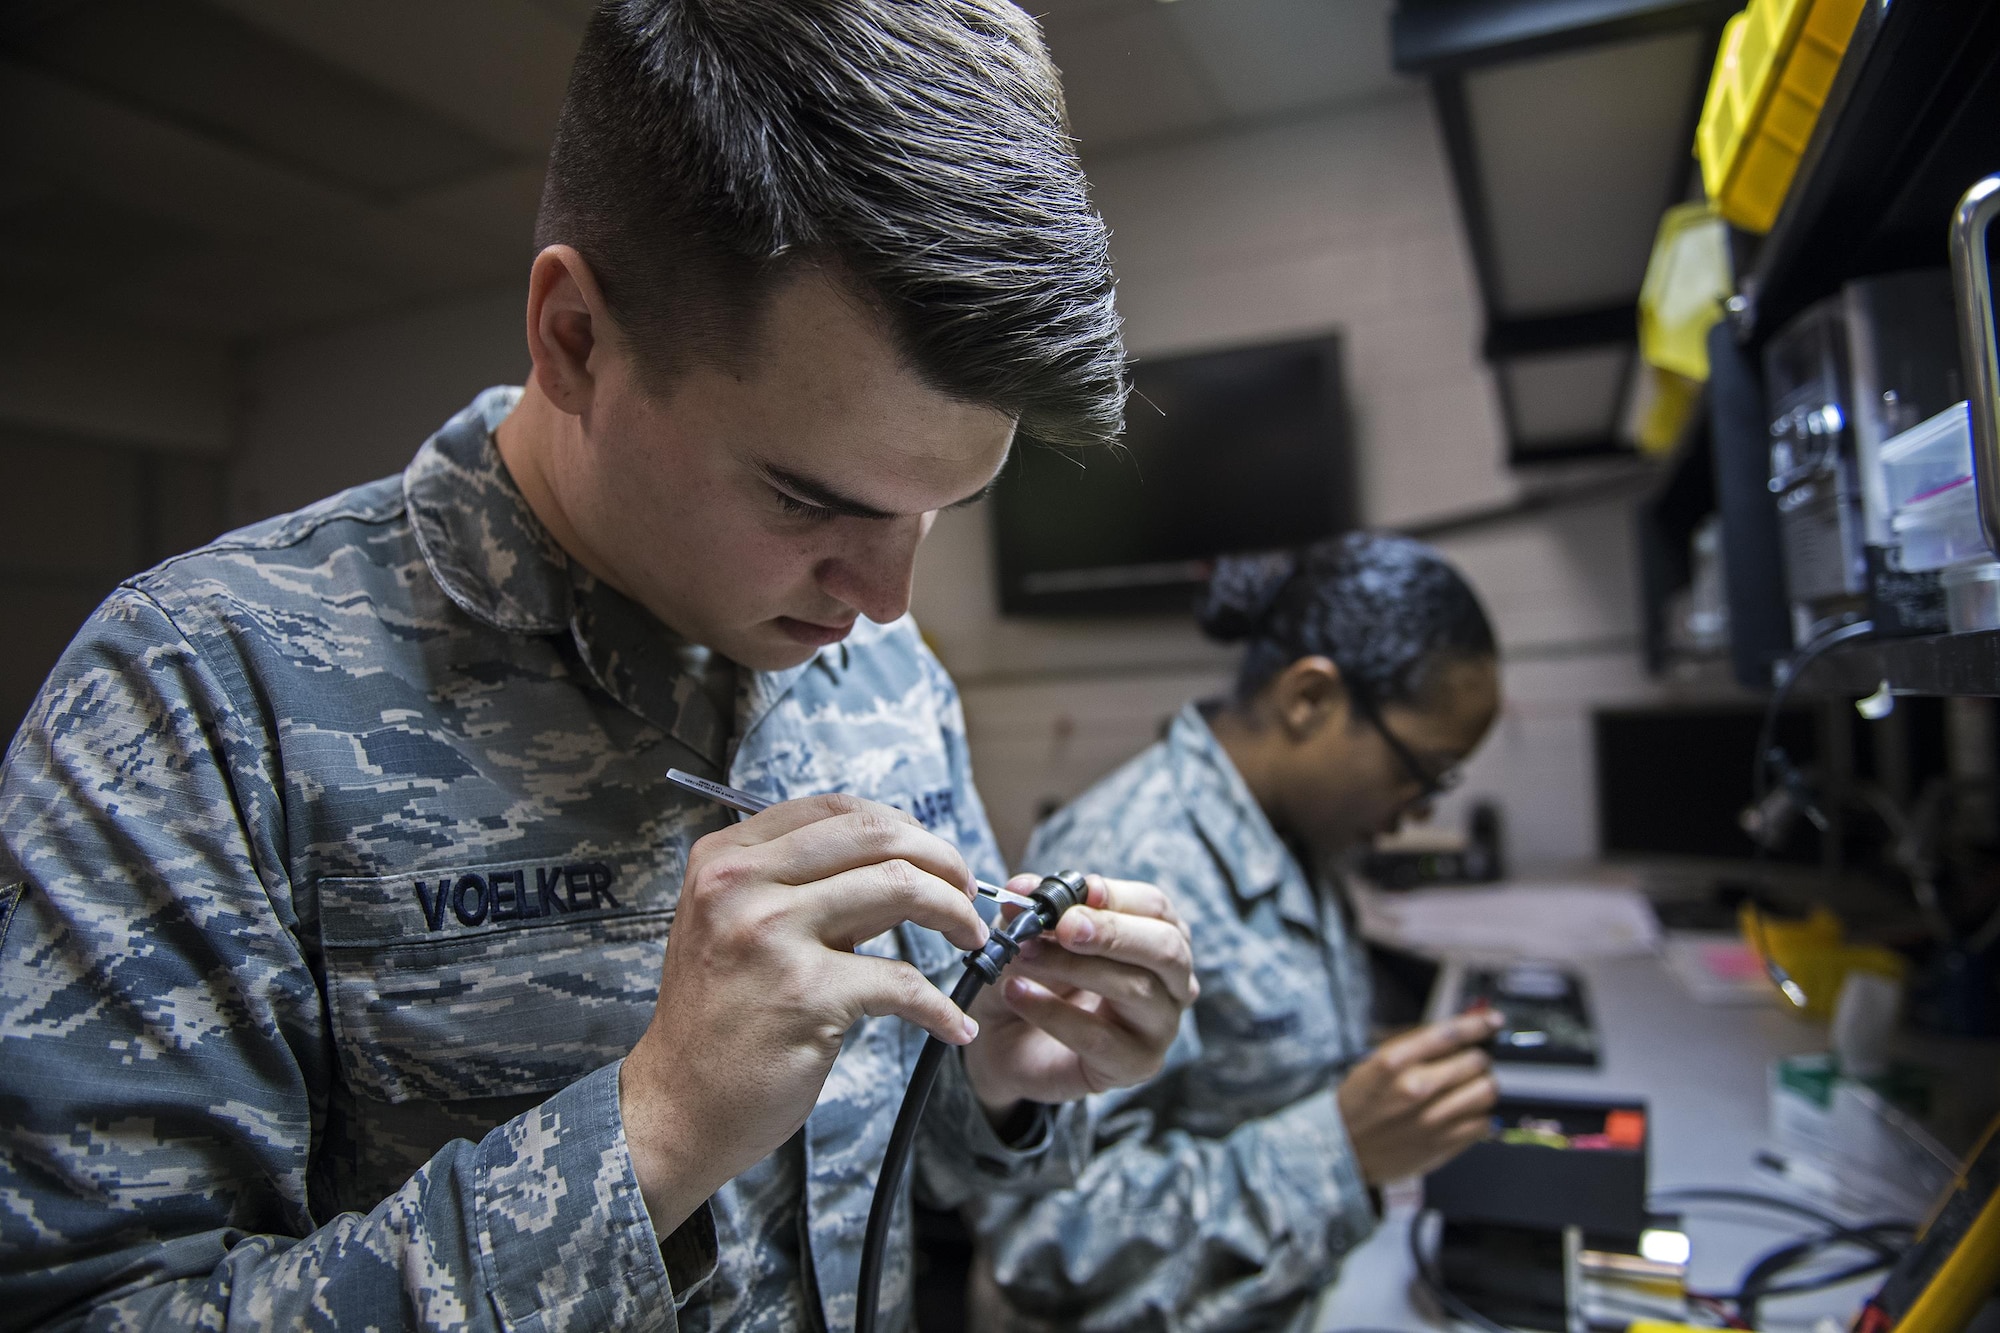 Staff Sgt. Cody Voelker, 23d Maintenance Group Air Force Repair Enhancement Program Technician, removes wires from a plug, Jan. 30, 2017, at Moody Air Force Base, Ga. Moody’s AFREP technicians have an over 90 percent success rate when it comes to fixing parts. (U.S. Air Force photo by Airman 1st Class Janiqua P. Robinson)